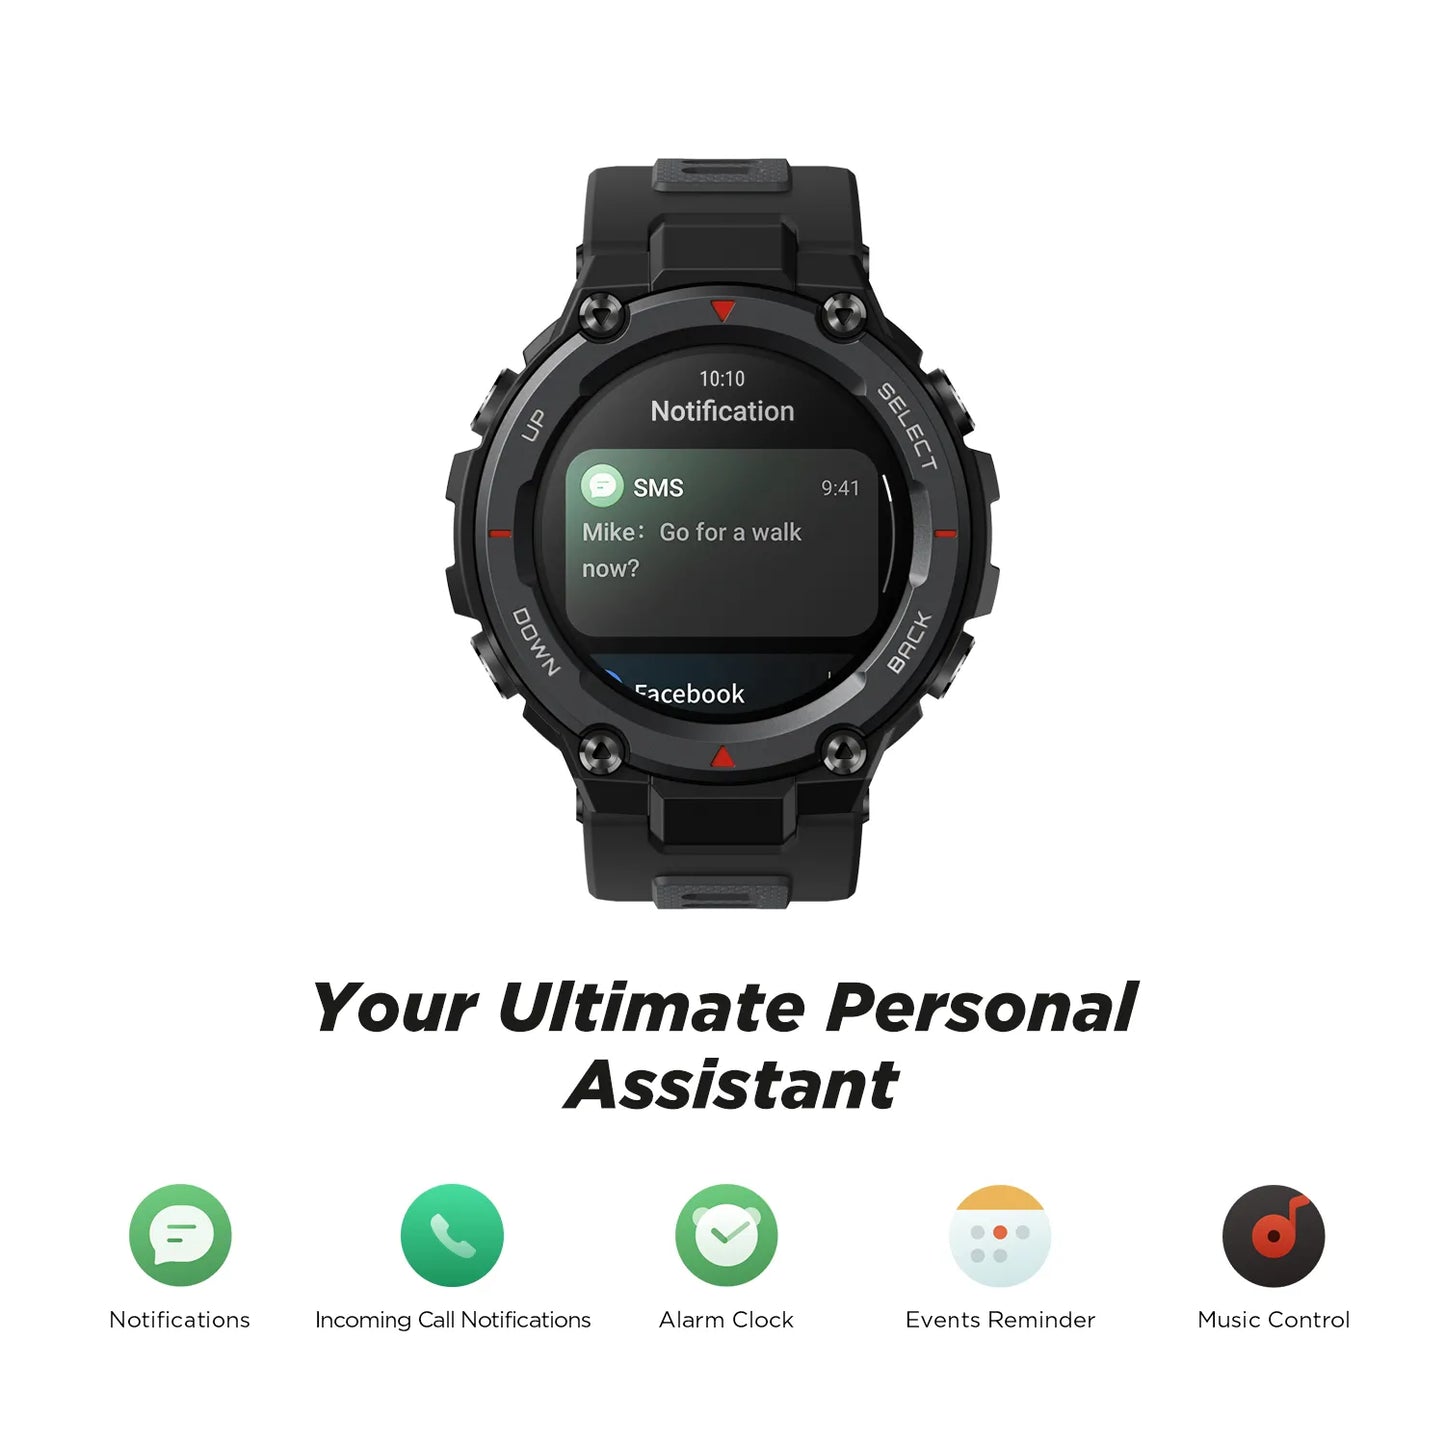 Amazfit T-rex Trex Pro T Rex GPS Waterproof Smartwatch Outdoor 18-day Battery Life 390mAh Smart Watch For Android iOS Phone